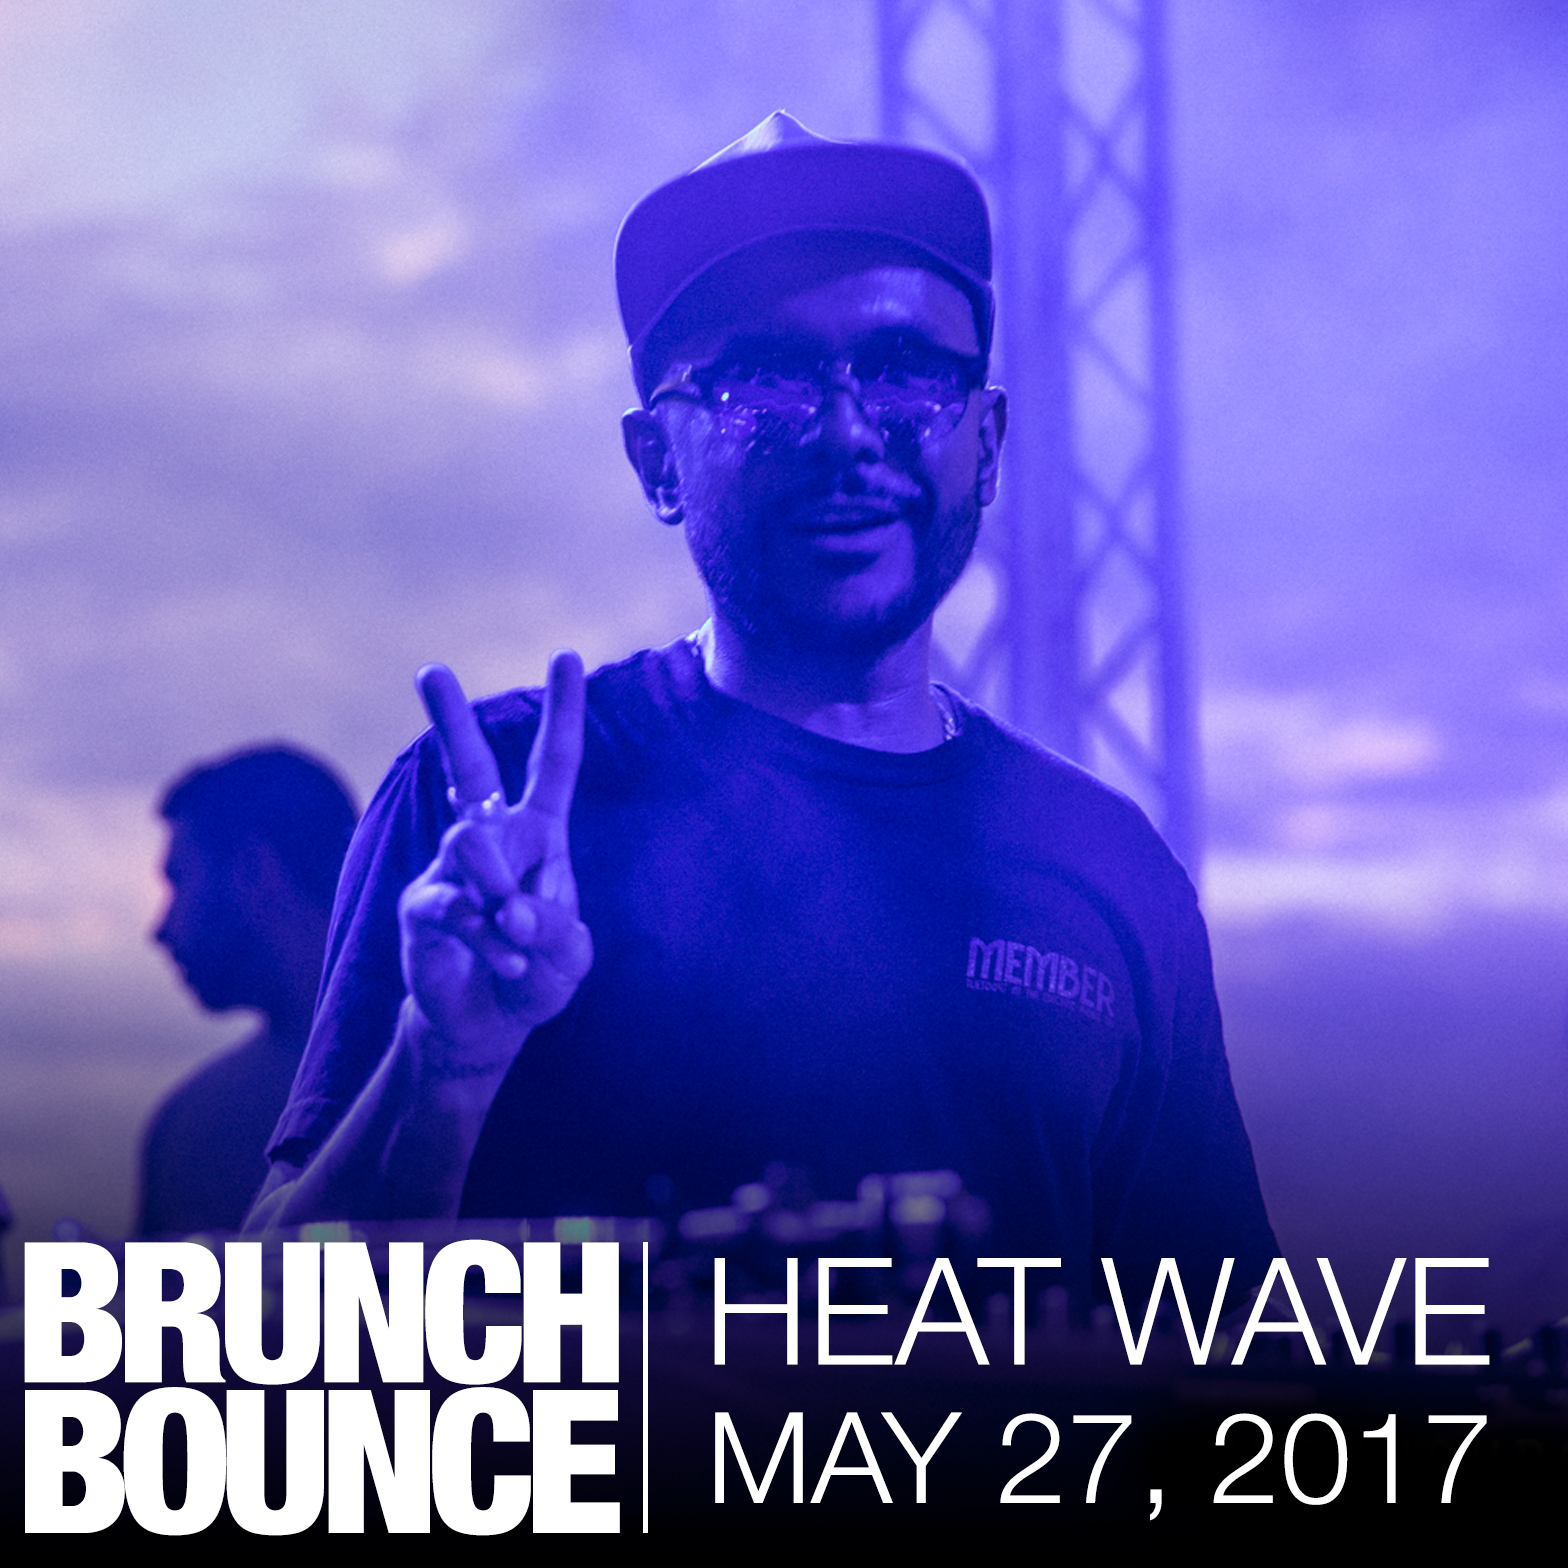 Brunch Bounce Heat Wave May 27, 2017